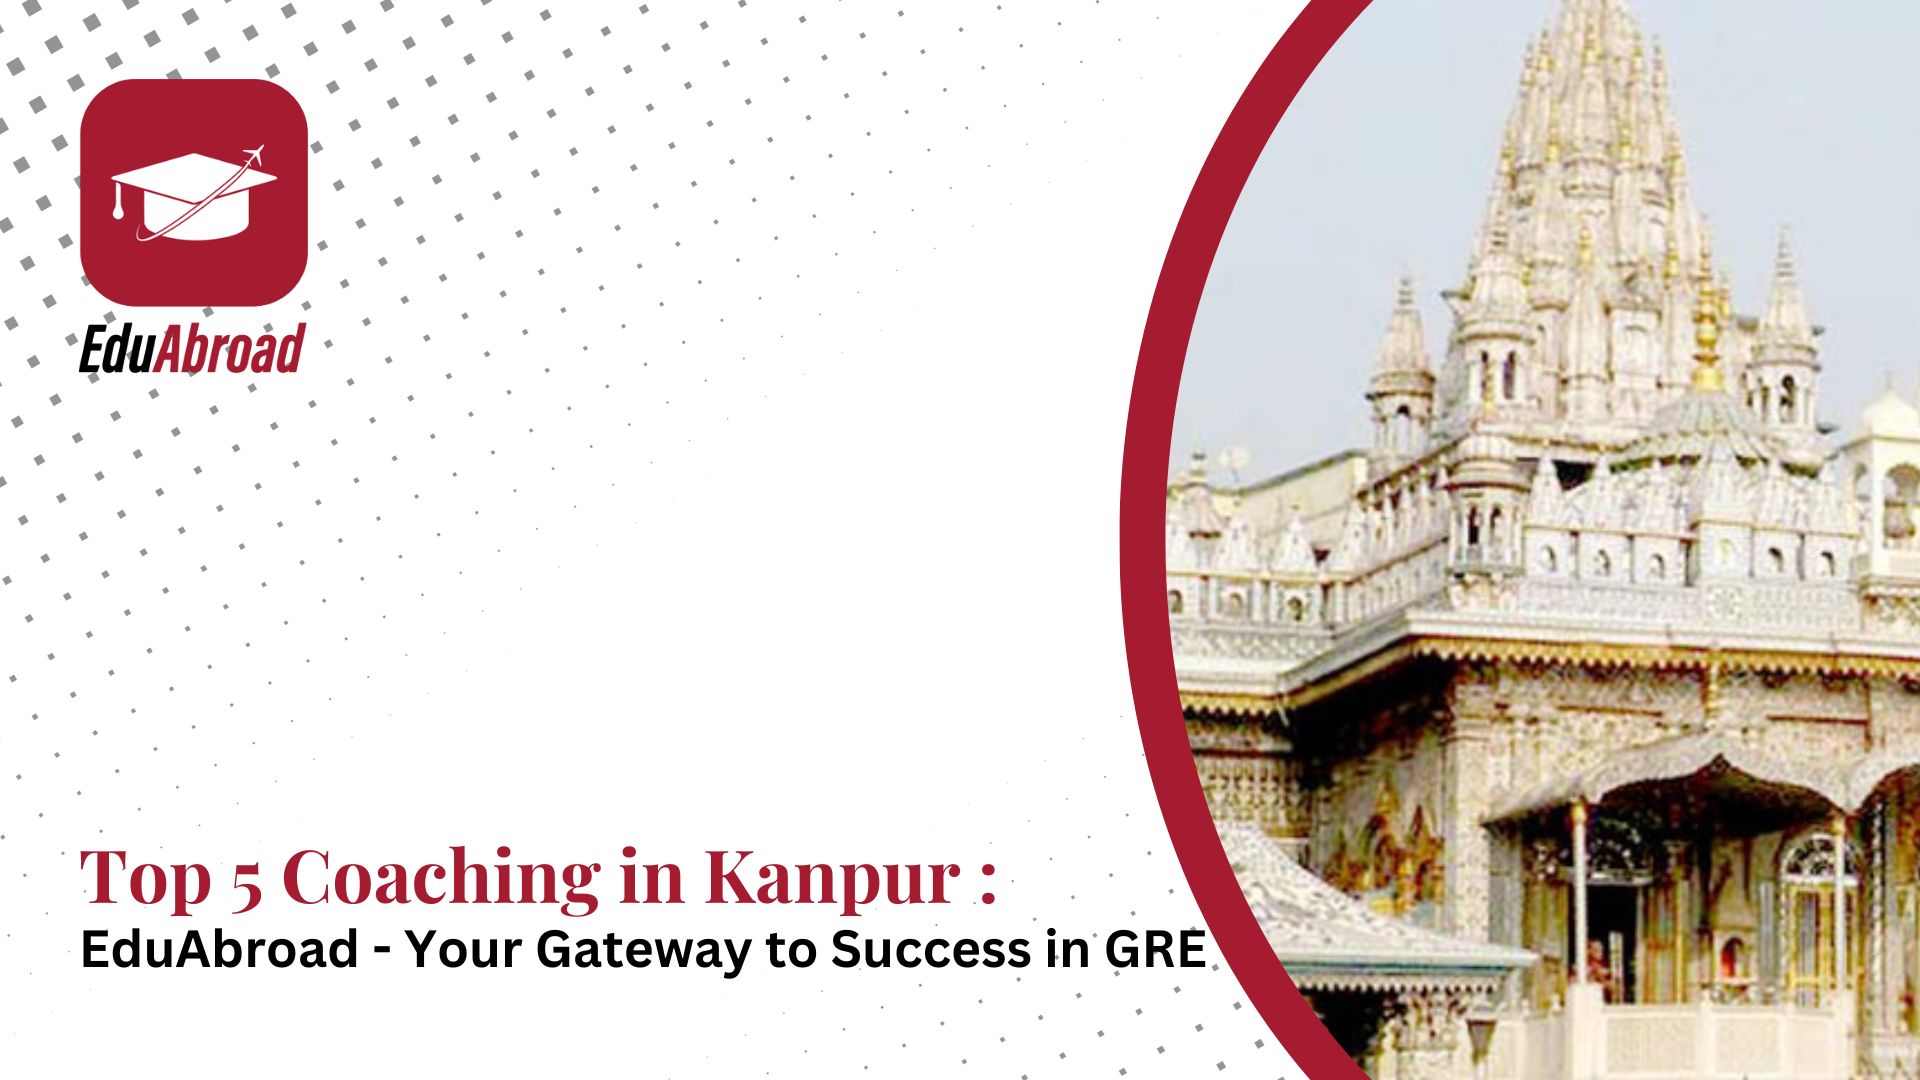 Top 5 Coaching in Kanpur : EduAbroad - Your Gateway to Success in GRE